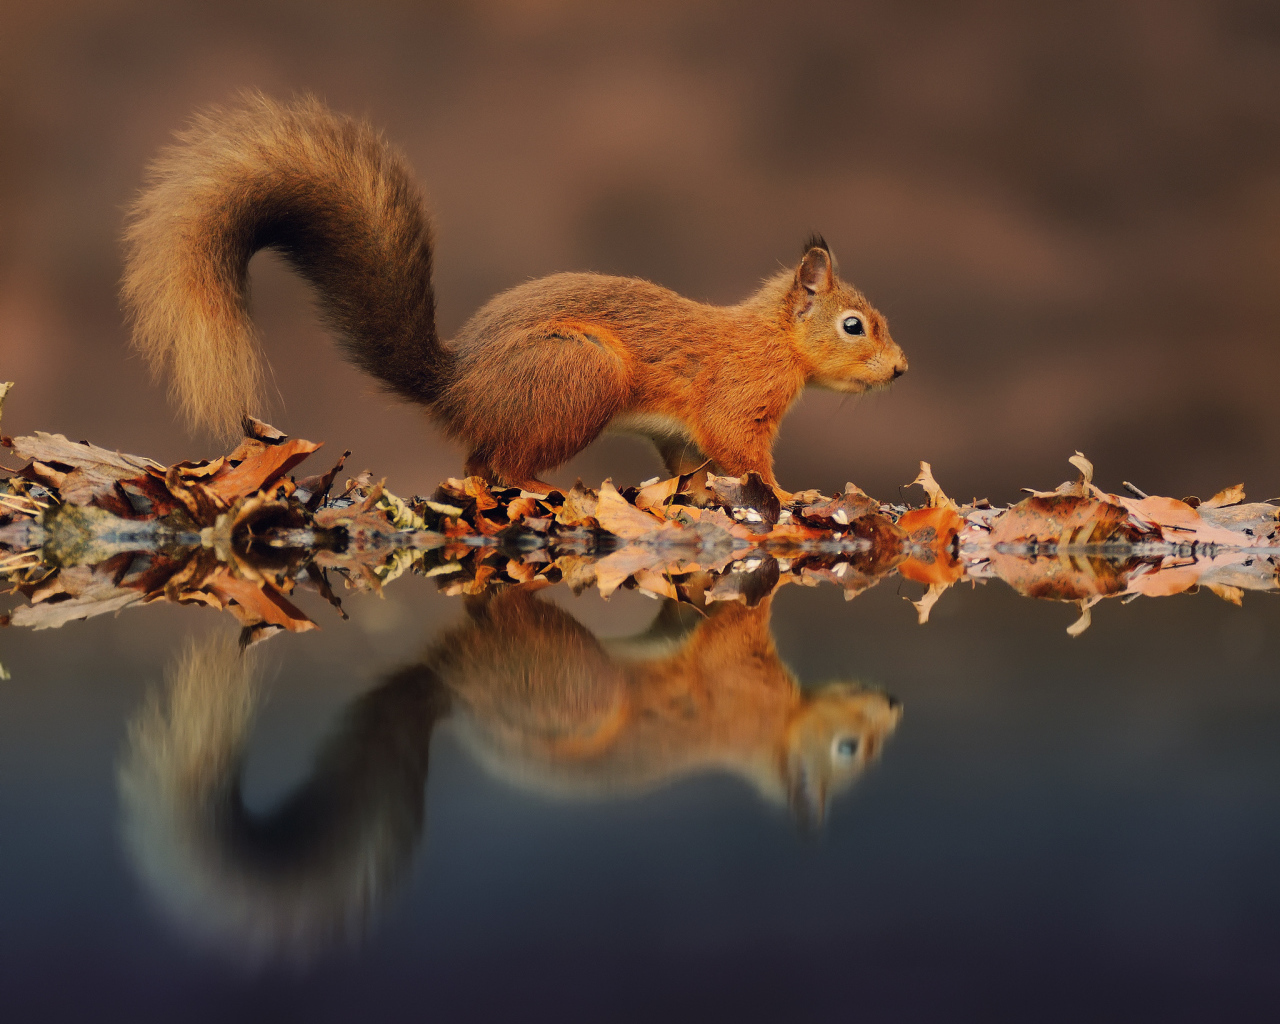 Squirrel and its reflection